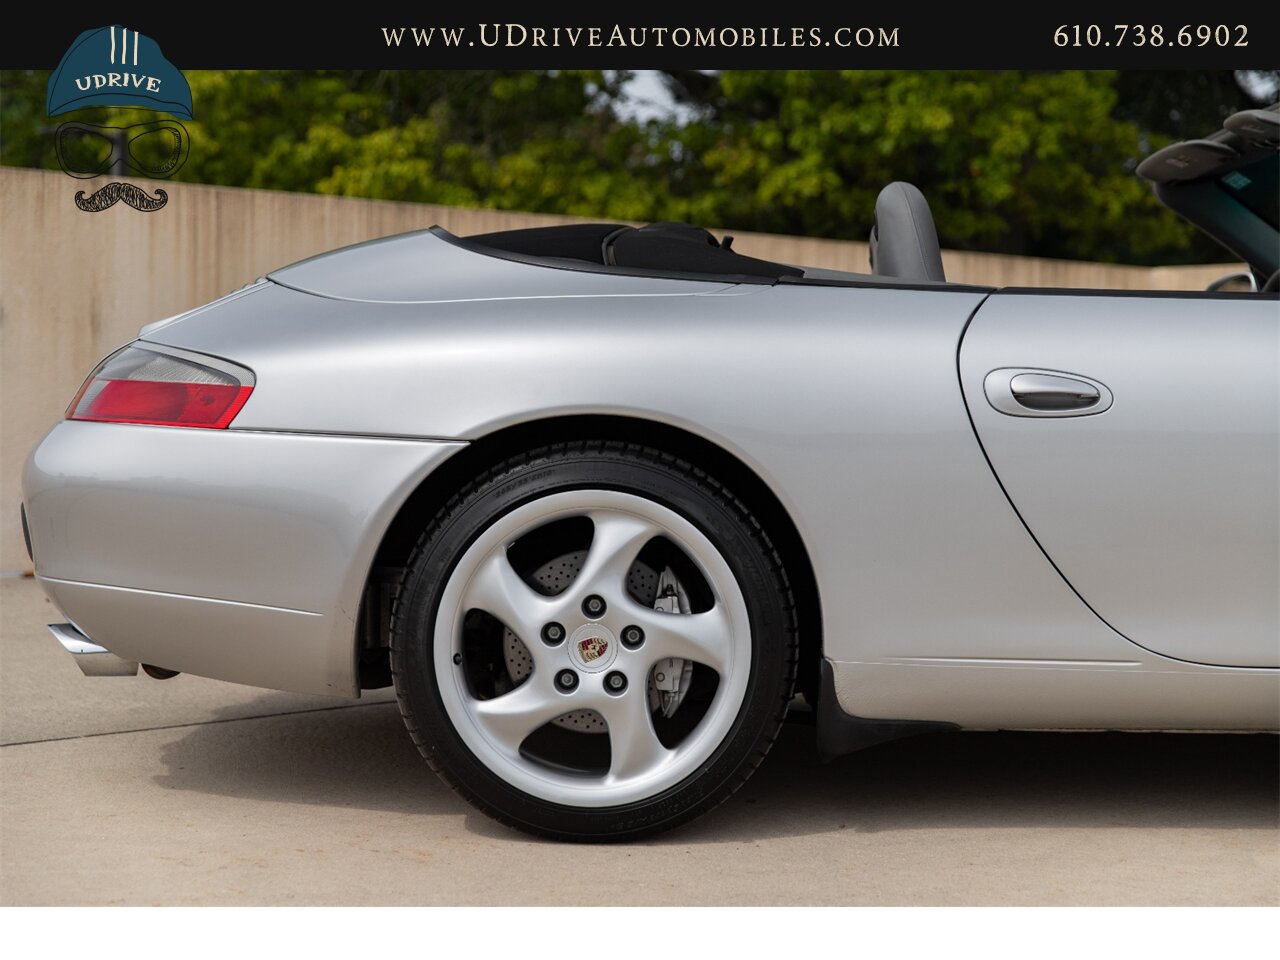 2001 Porsche 911 Carrera 4 Cabriolet Tiptronic IMS Upgrade  Power Seats 18in Turbo Look Wheels 2 Owners $5k Recent Service - Photo 20 - West Chester, PA 19382